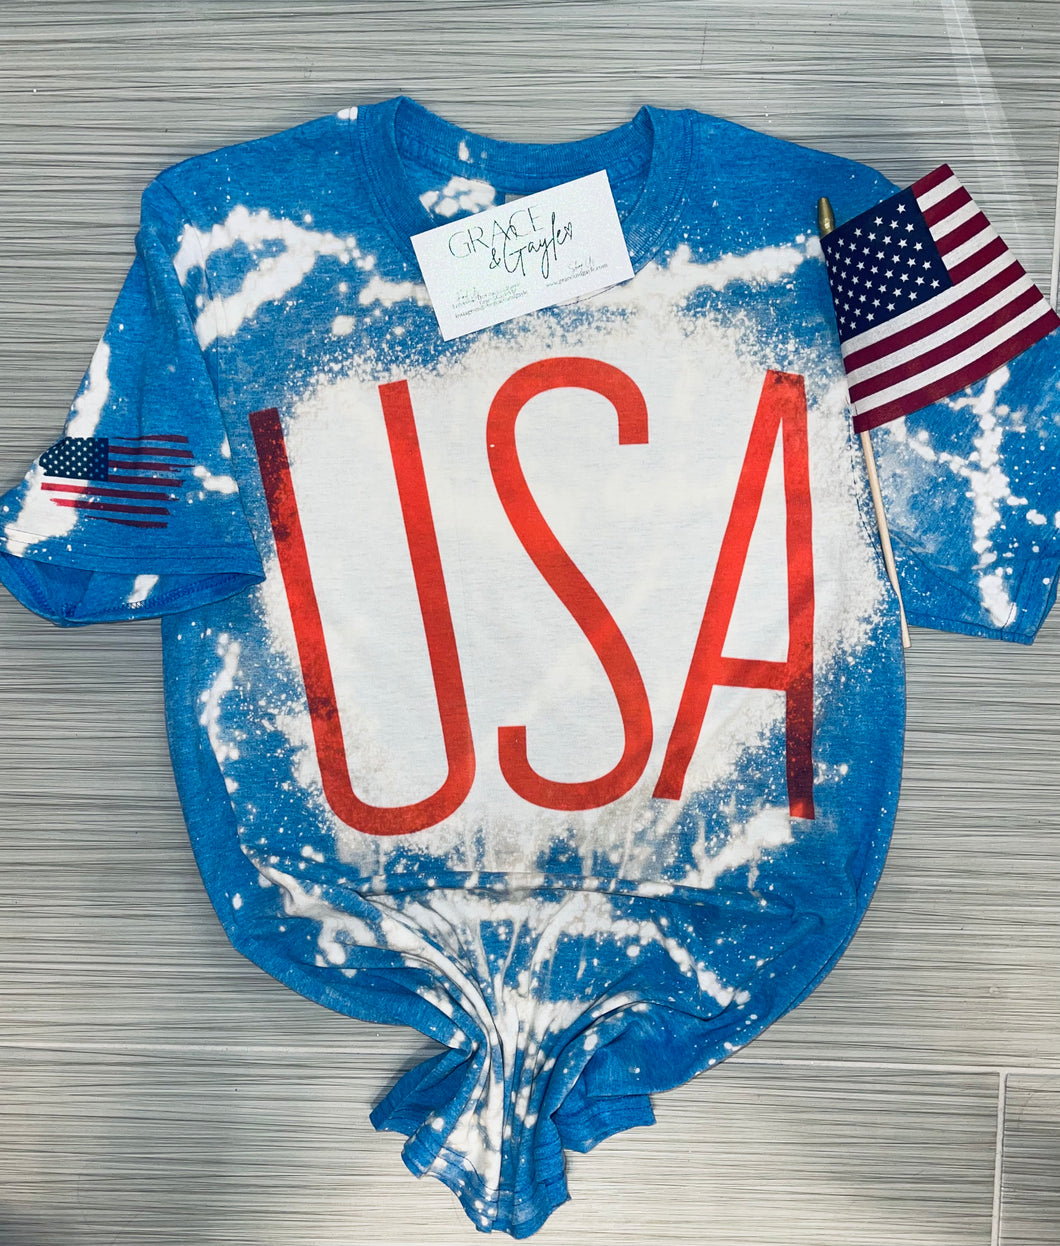 USA bleached t